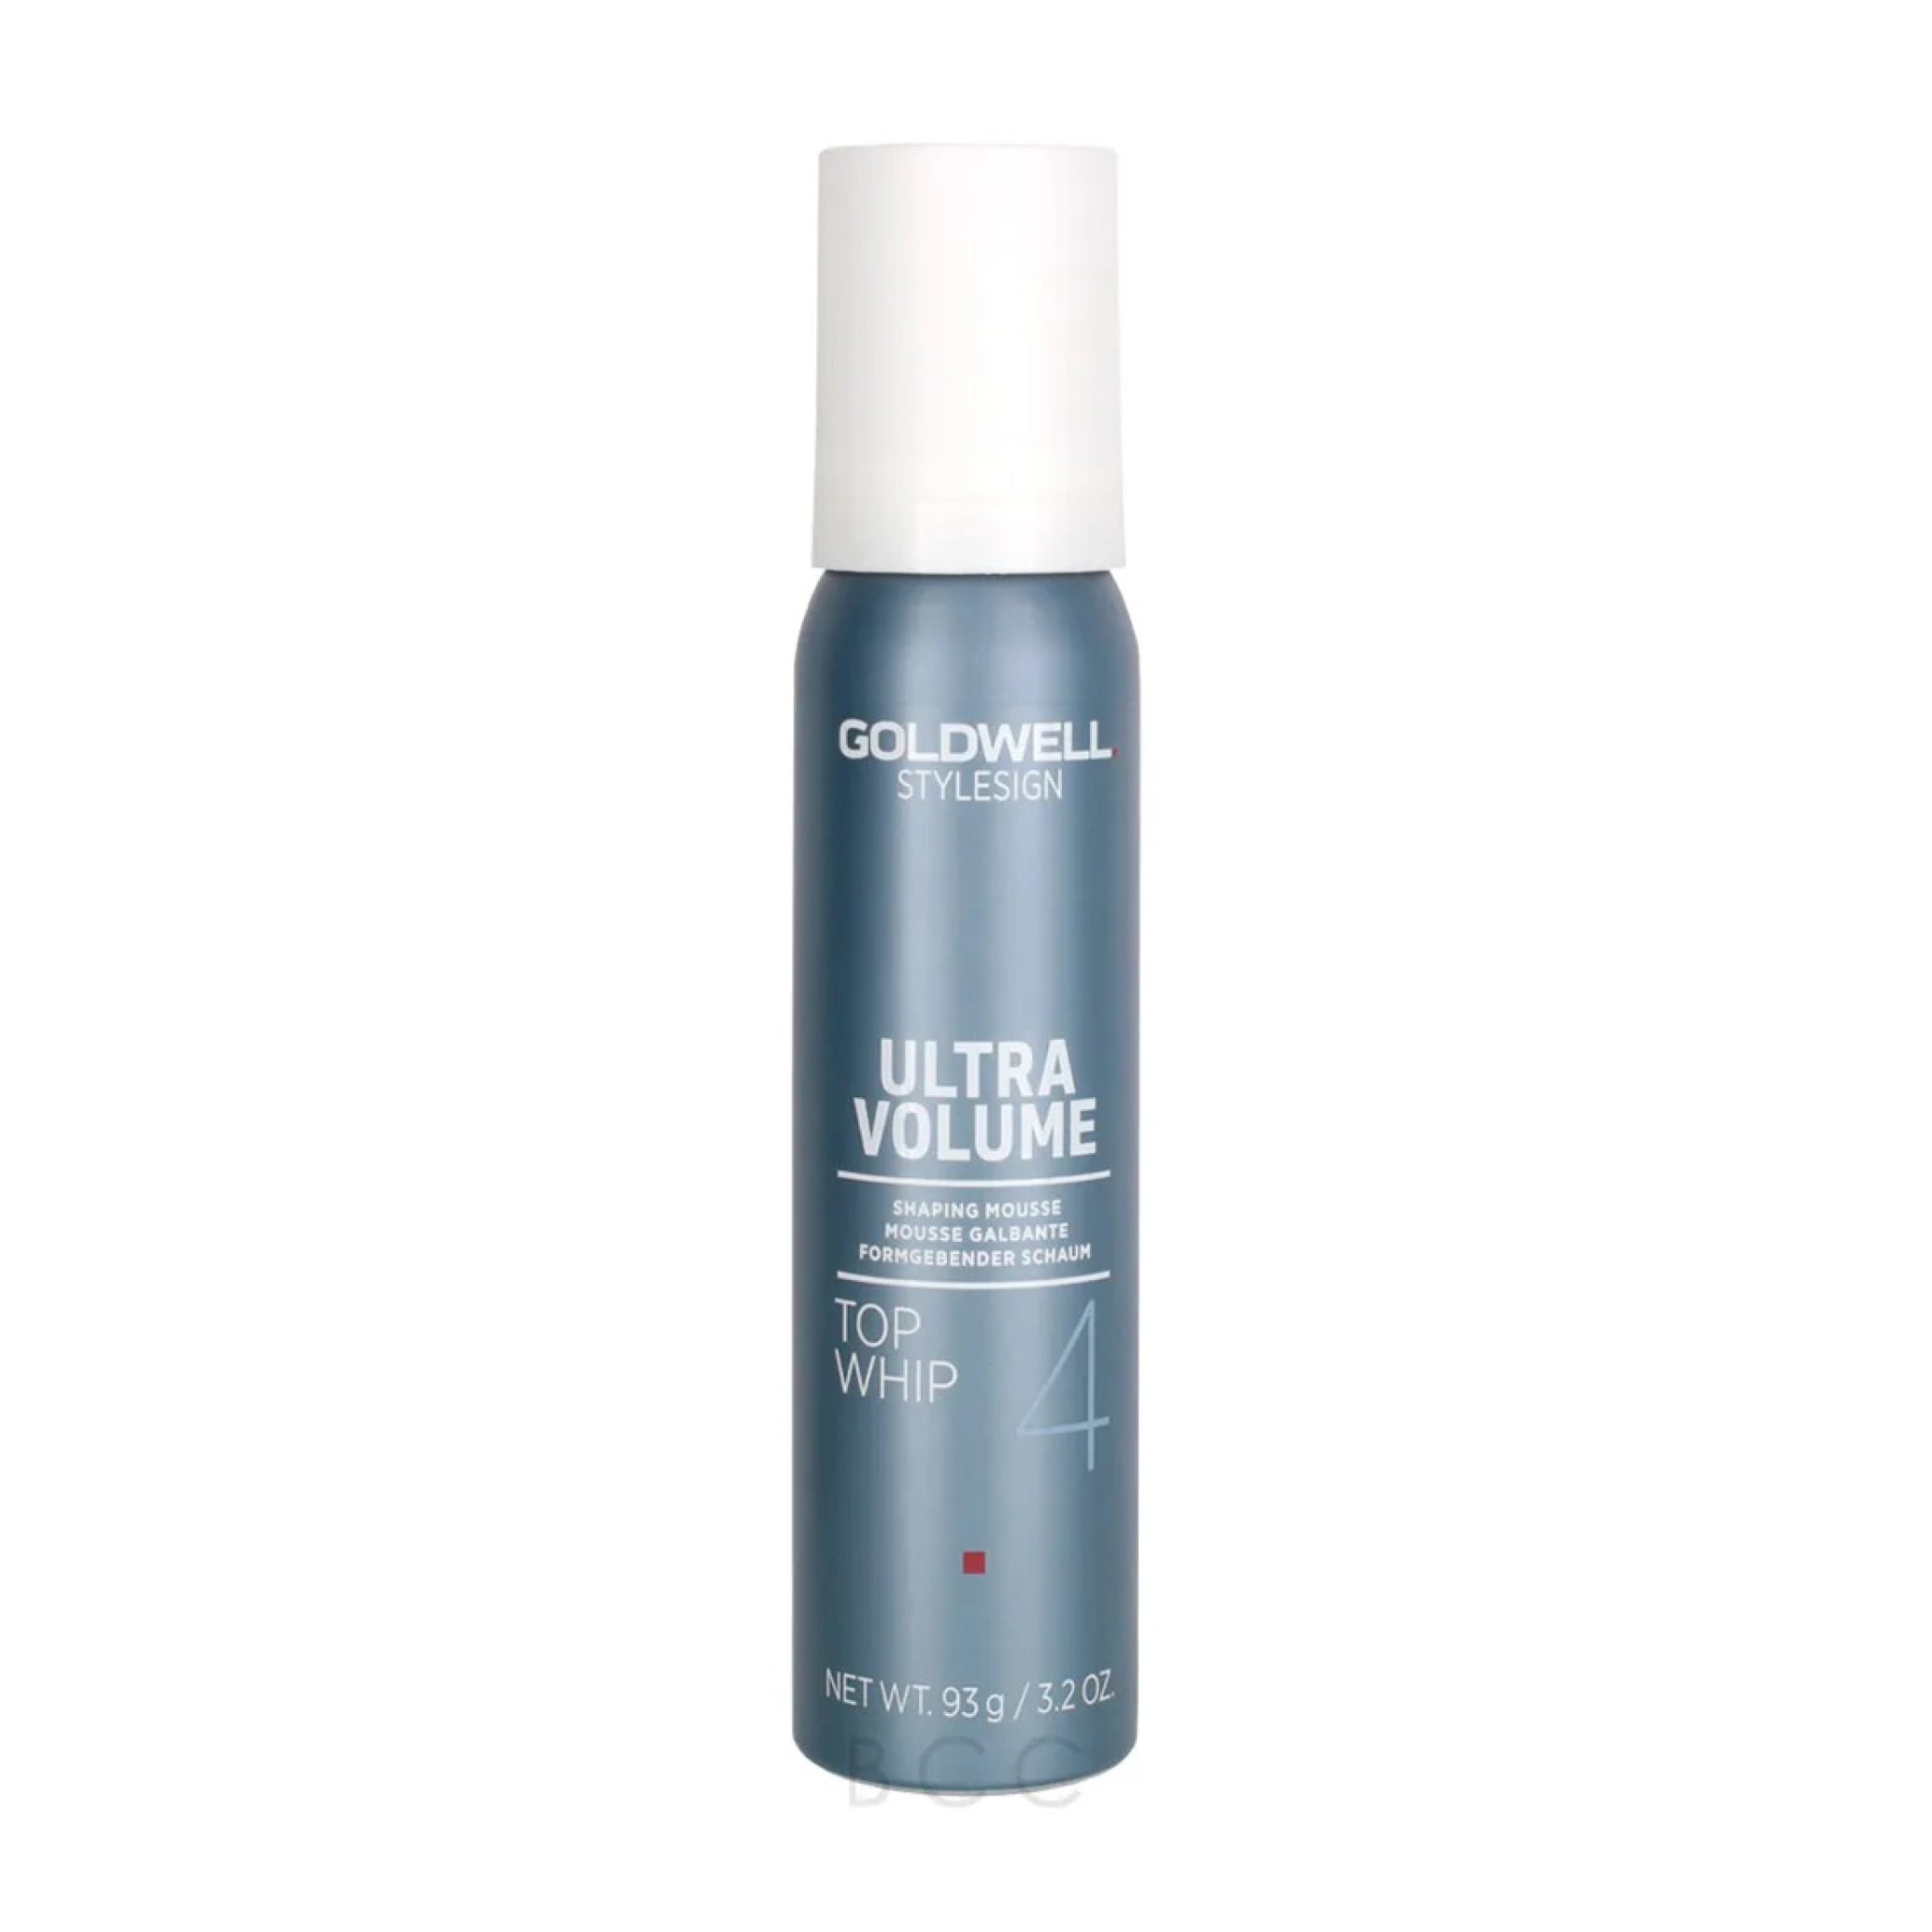 Goldwell Ultra Volume - Top Whip Shaping Mousse